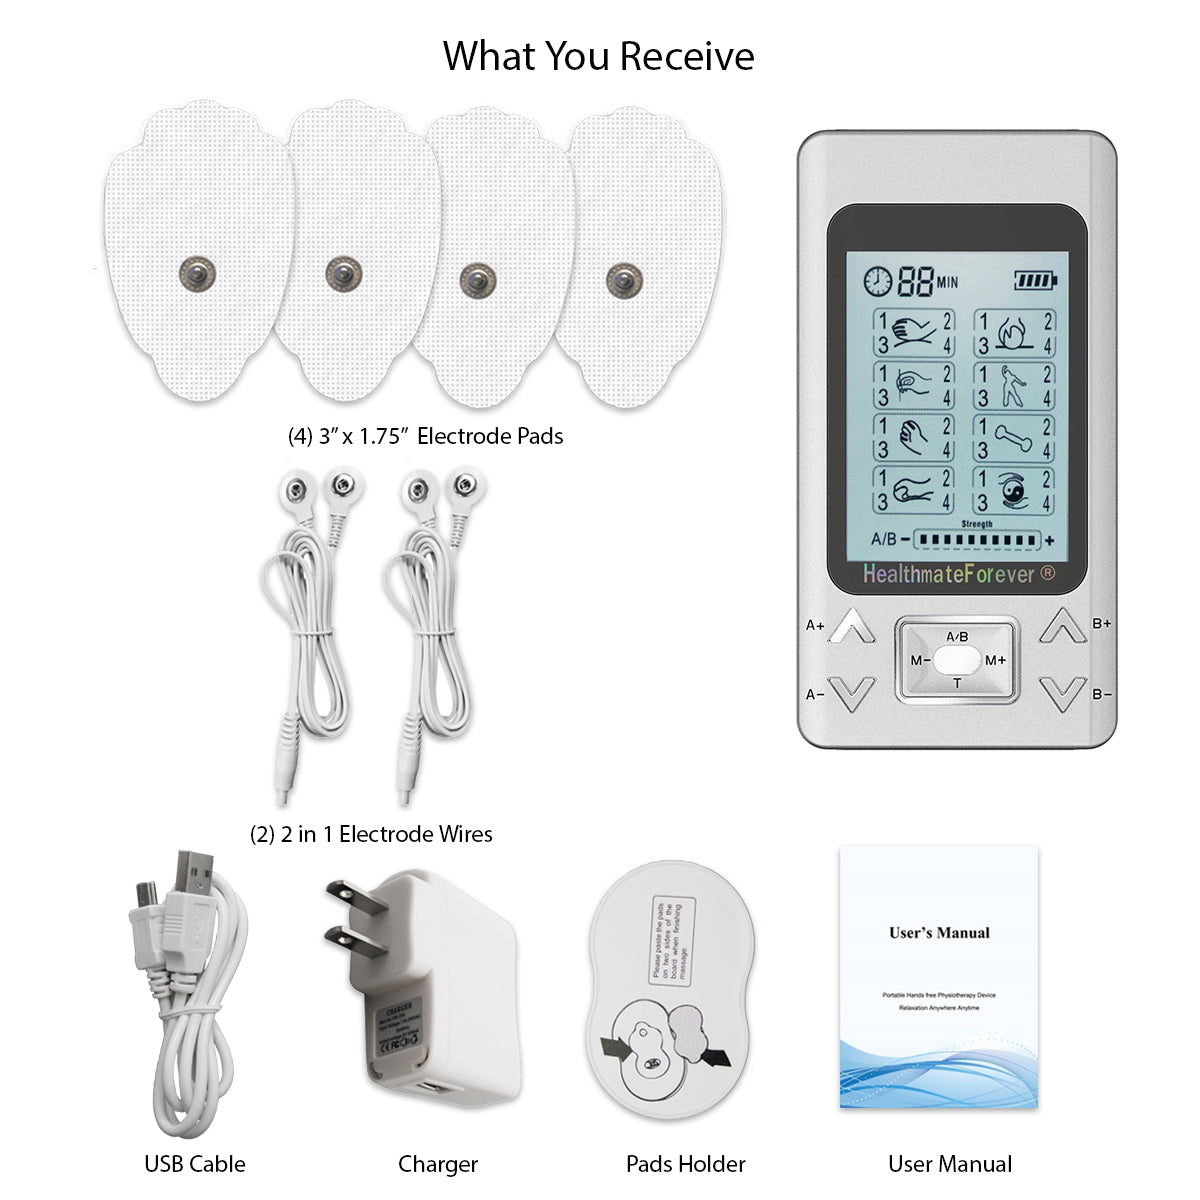 New Arrival - 2020 Version 32 Modes PRO32AB2 TENS Unit & Muscle Stimulator - 2 Year Warranty - HealthmateForever.com